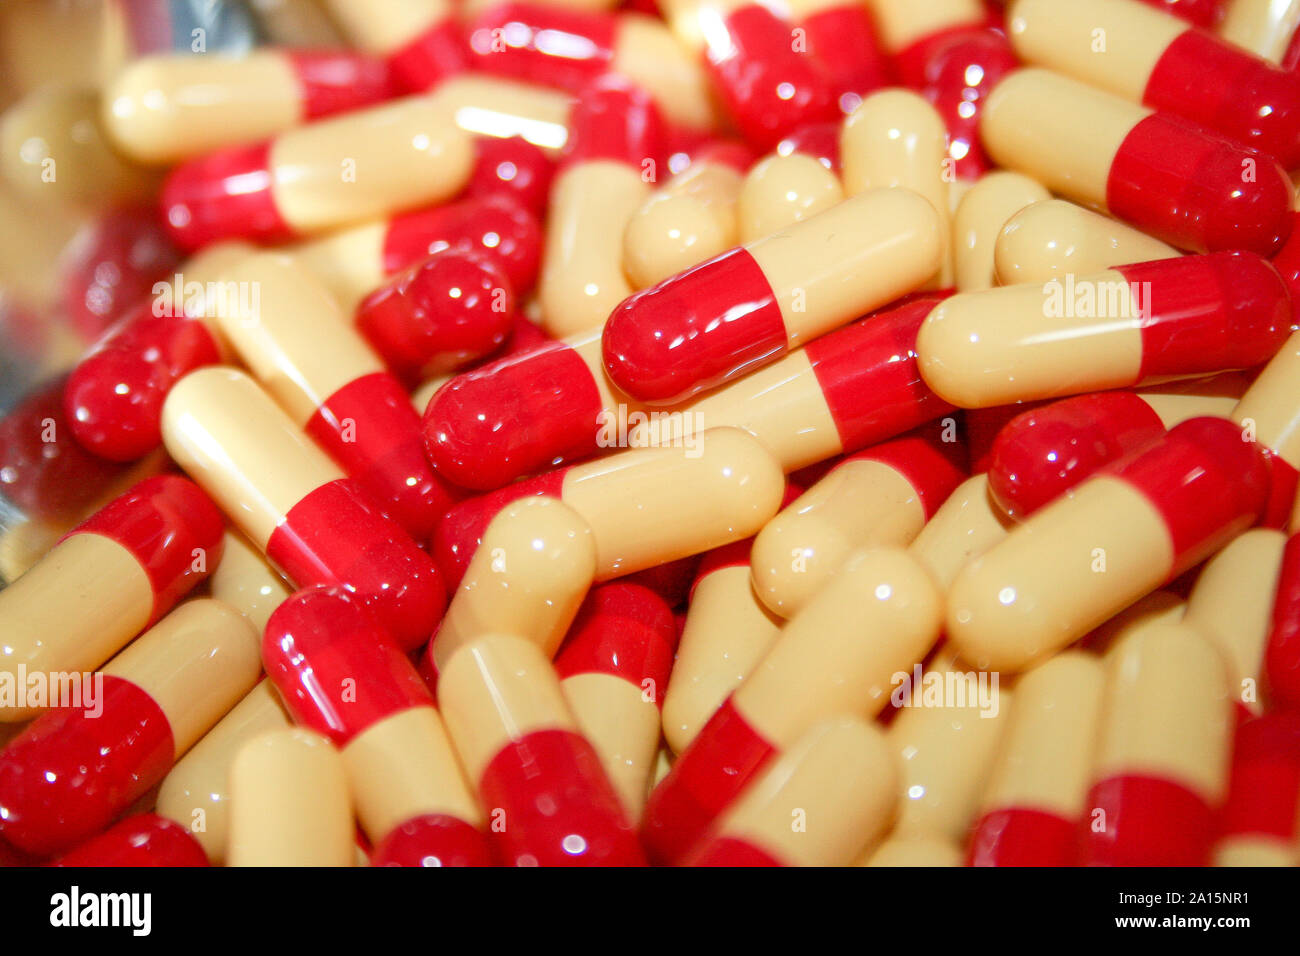 Medicine and healthy. Drugs abuse, addiction, chronic pain, medication confusion, and medical stuff. Cascade of many red and white pills and capsules Stock Photo